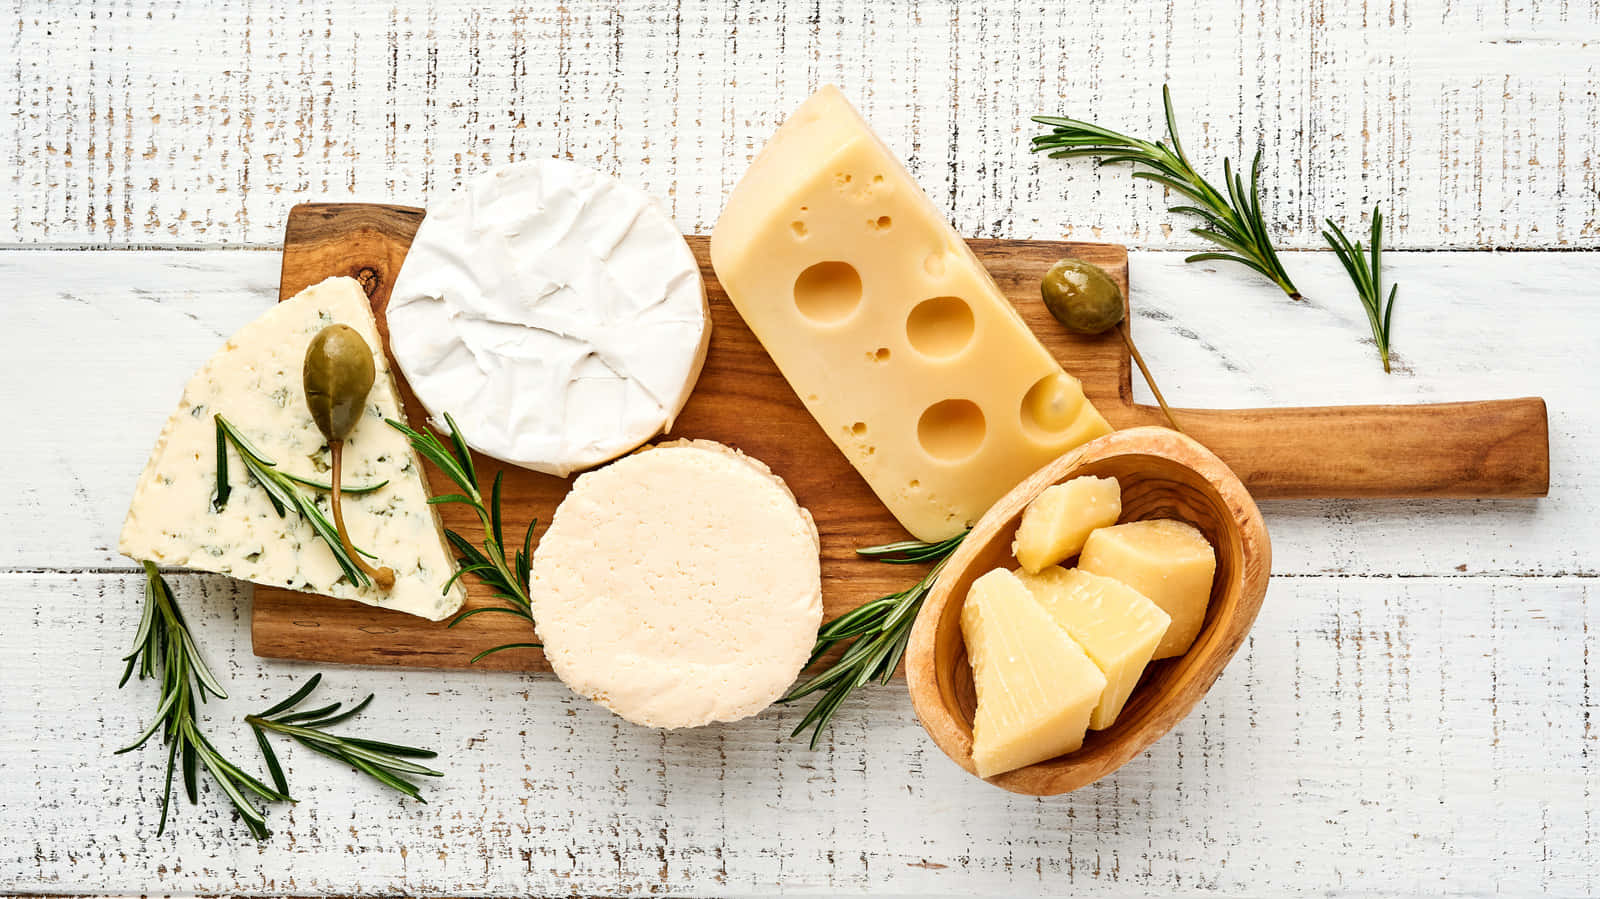 A Wooden Board With Cheese, Olives And Rosemary